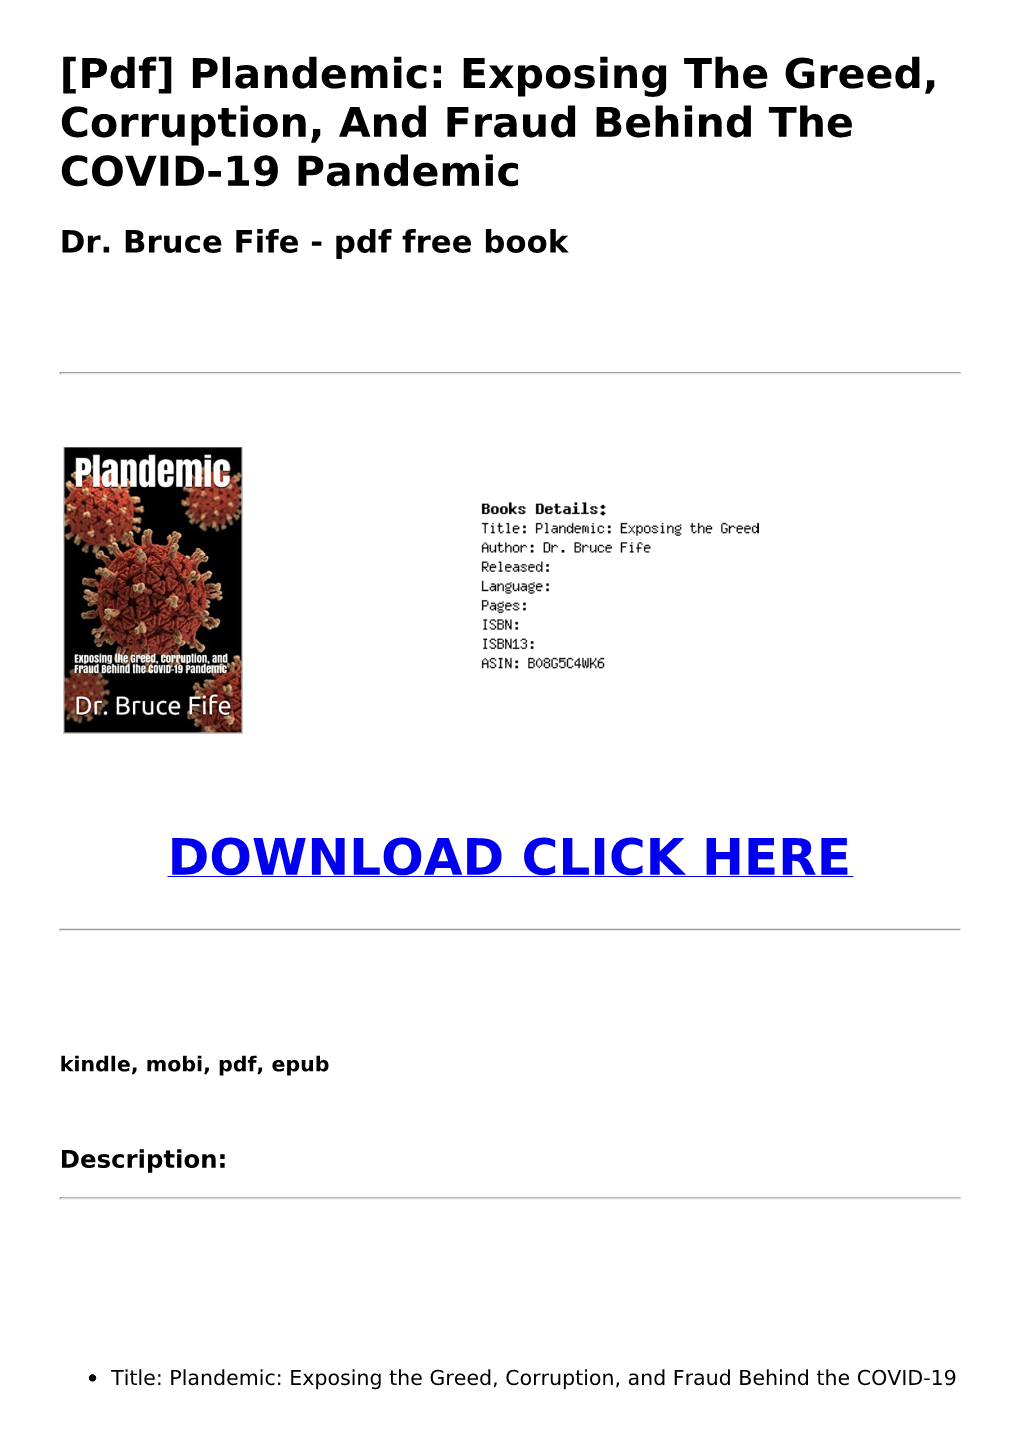 [Pdf] Plandemic: Exposing the Greed, Corruption, and Fraud Behind the COVID-19 Pandemic